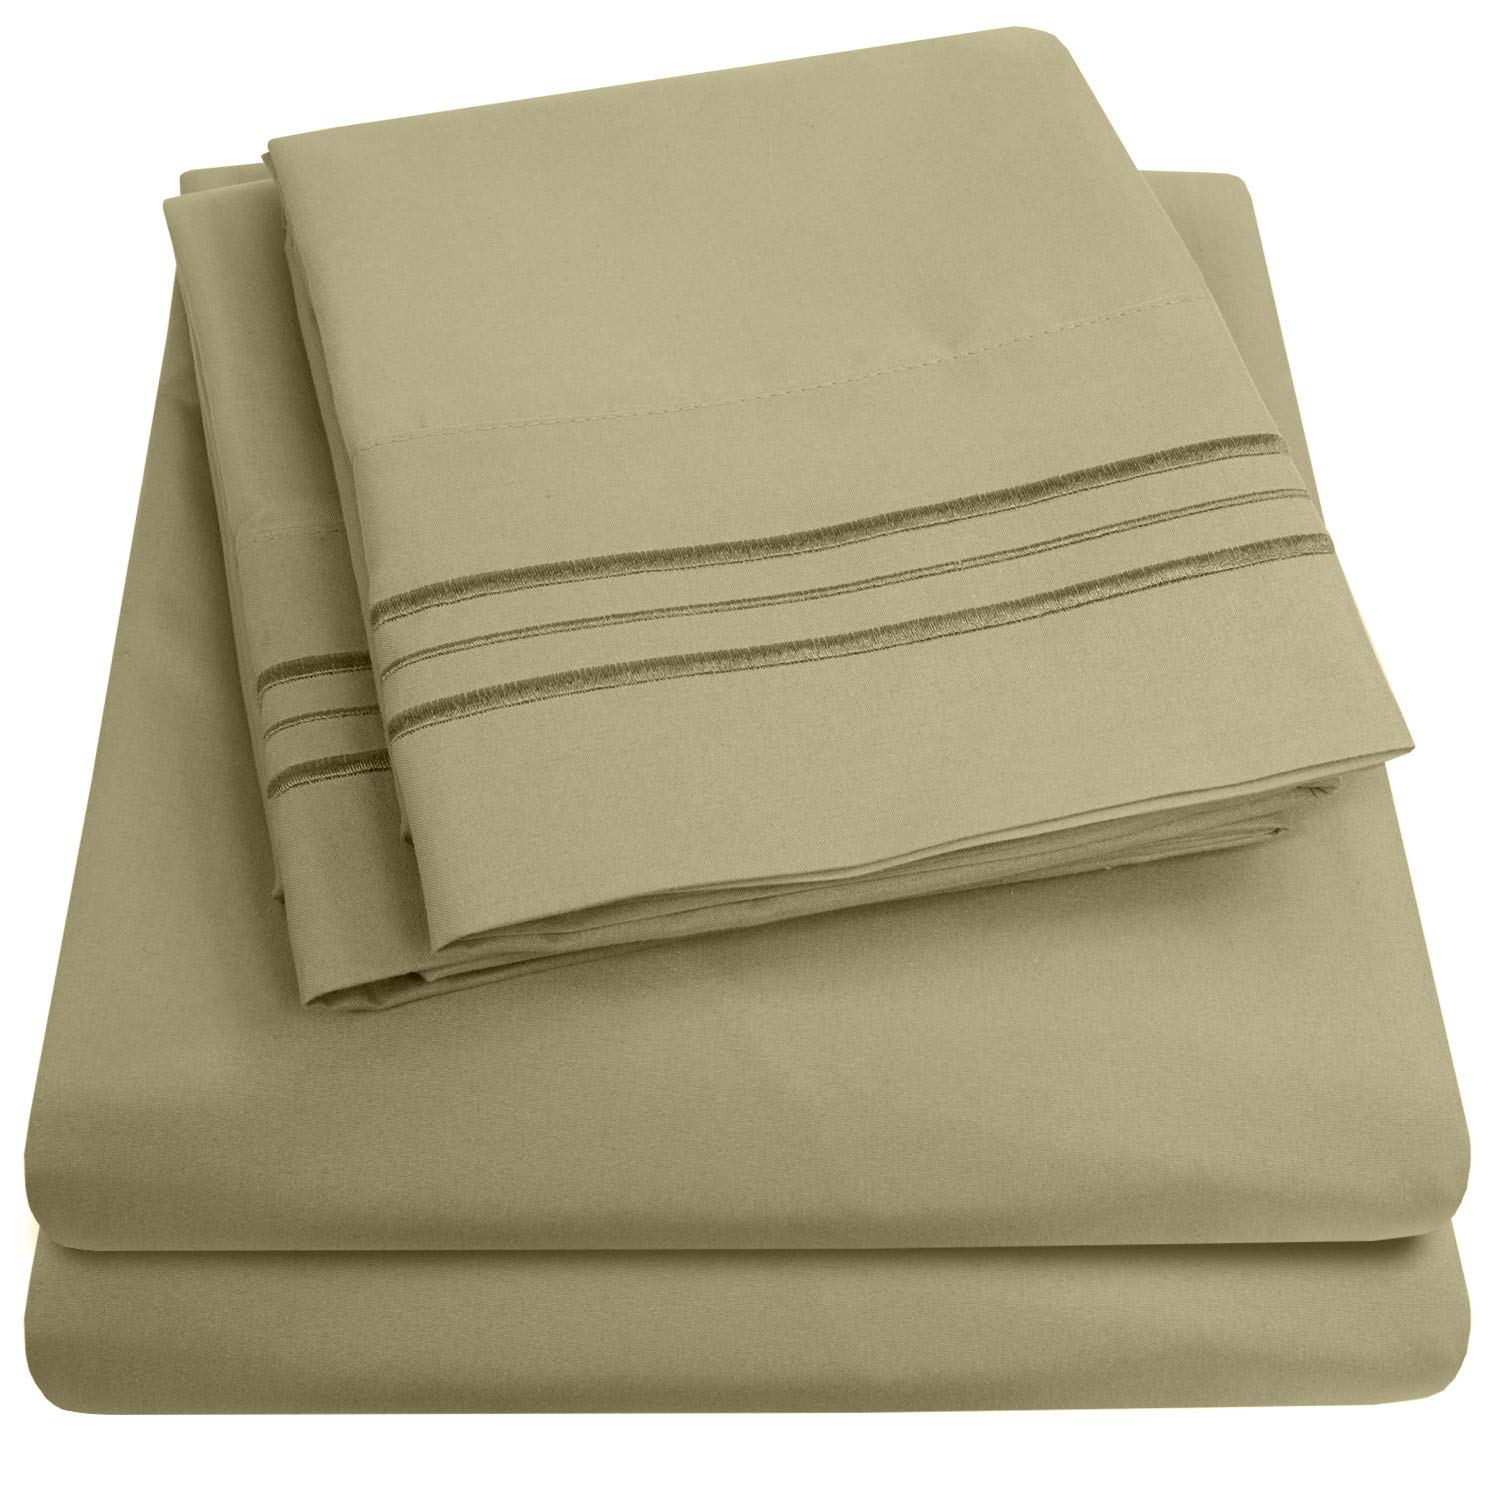 Book Cover 1500 Supreme Collection King Sheet Sets Sage Green - Luxury Hotel Bed Sheets and Pillowcase Set for King Mattress - Extra Soft, Elastic Corner Straps, Deep Pocket Sheets, King Sage Green